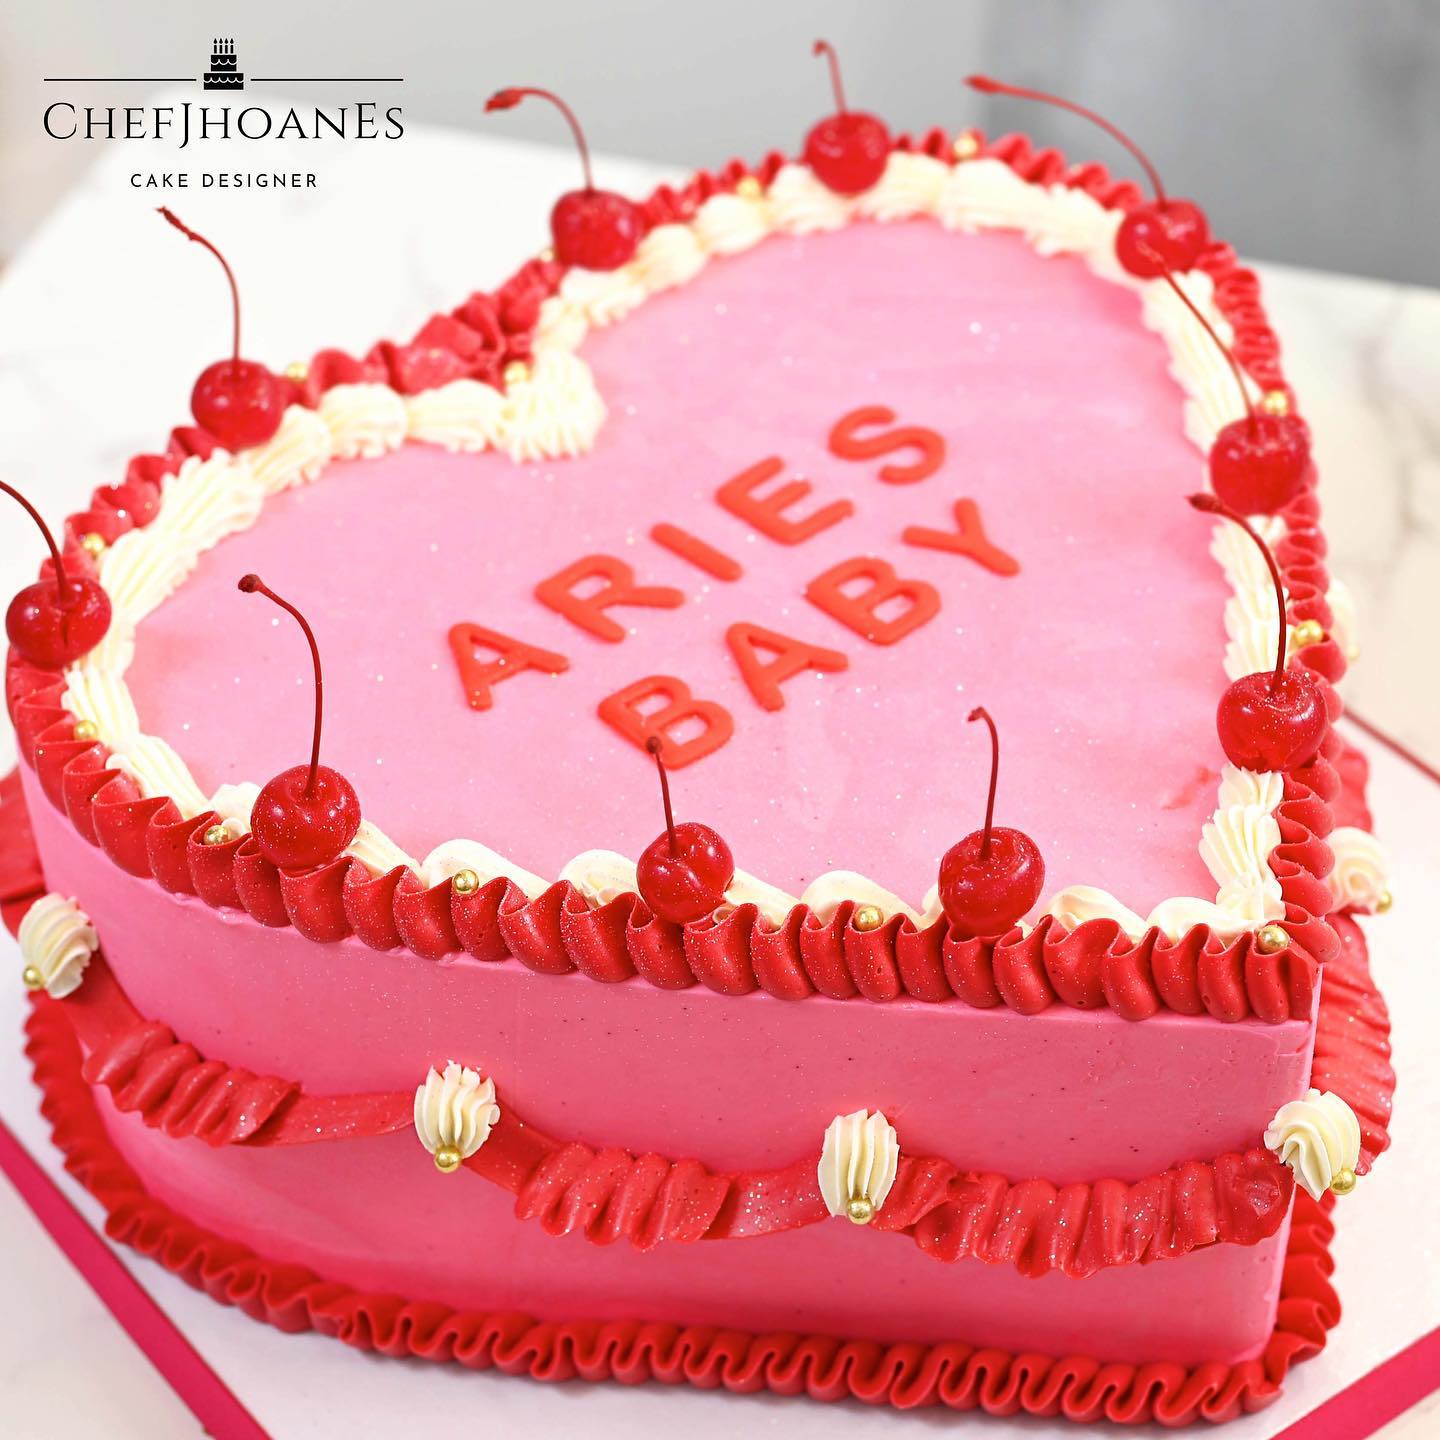 Aries baby cake. Feed 15 people.